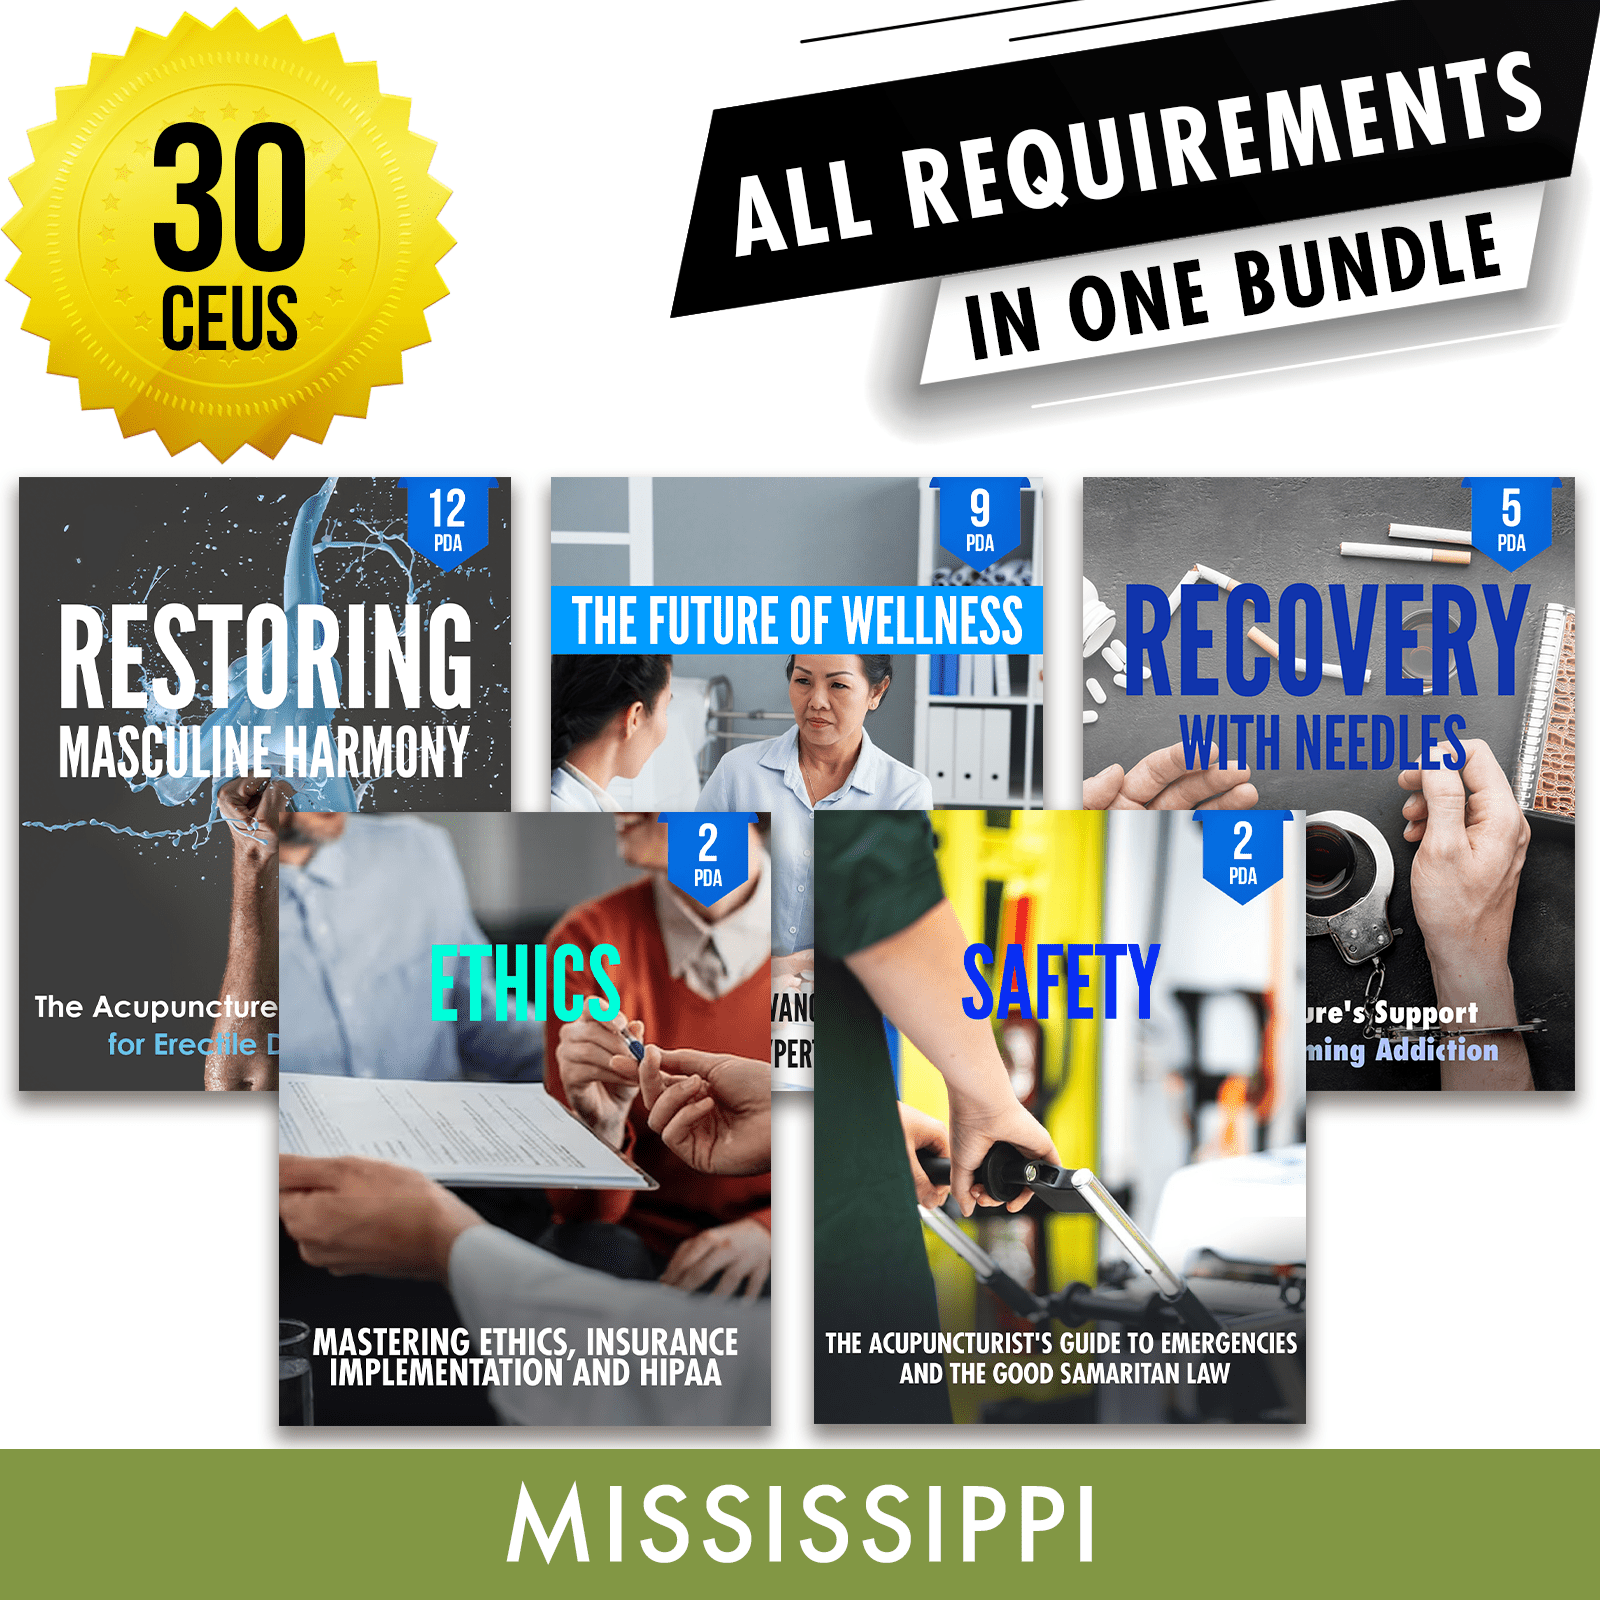 Mississippi Bundle 1: Full Recertification - All Required Acupuncture Continuing Education Credits in One Package, 30 PDA/CEU Hours ACEU Masters continuing education florida california nccaom australia uk canada